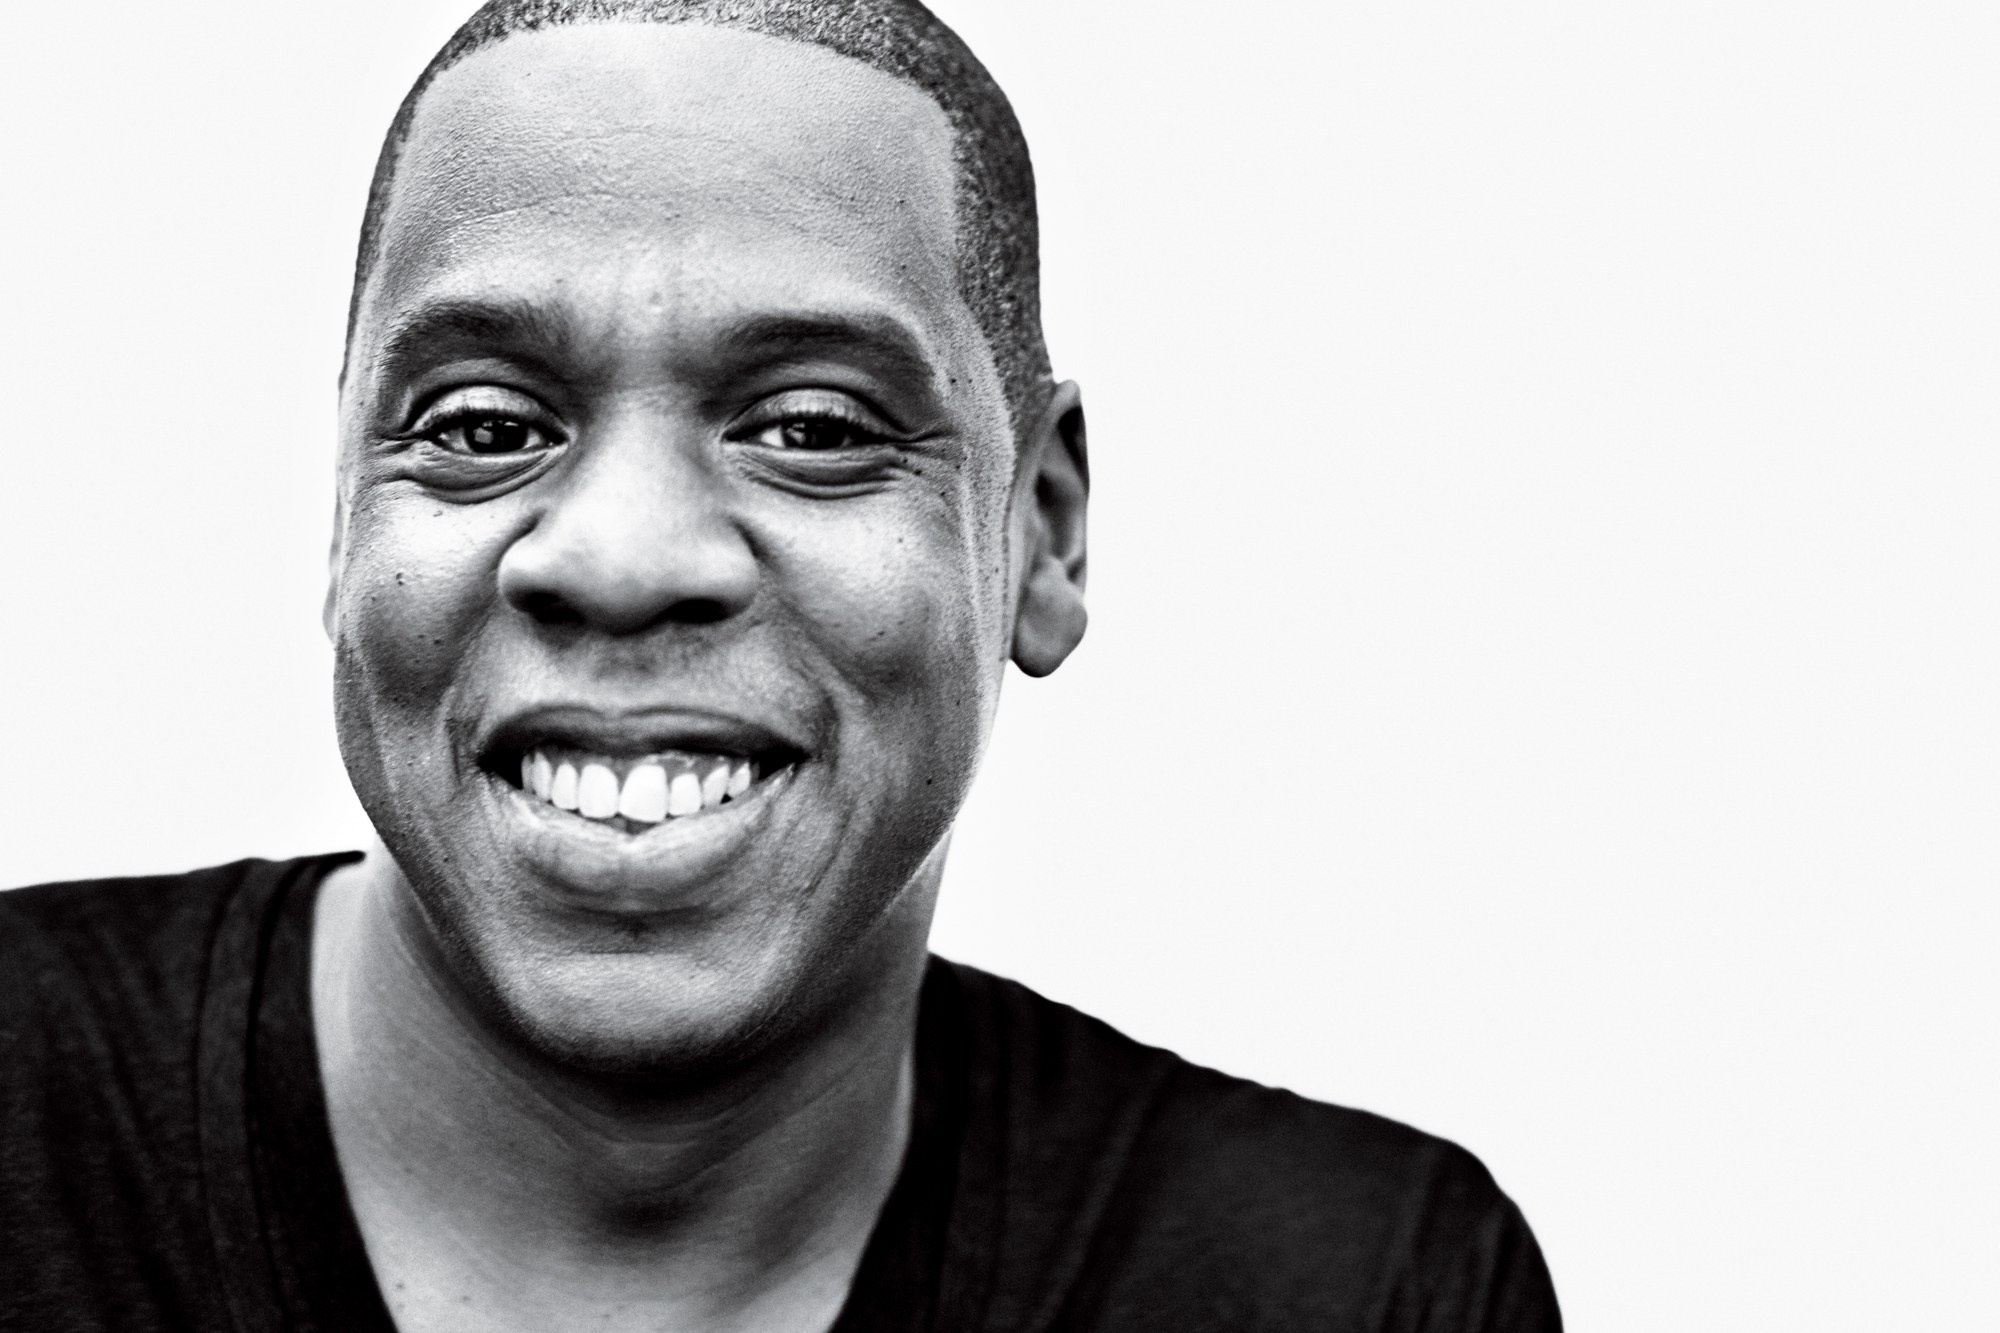 Jay-Z, Music wallpapers, High quality pictures, 2019 collection, 2000x1340 HD Desktop